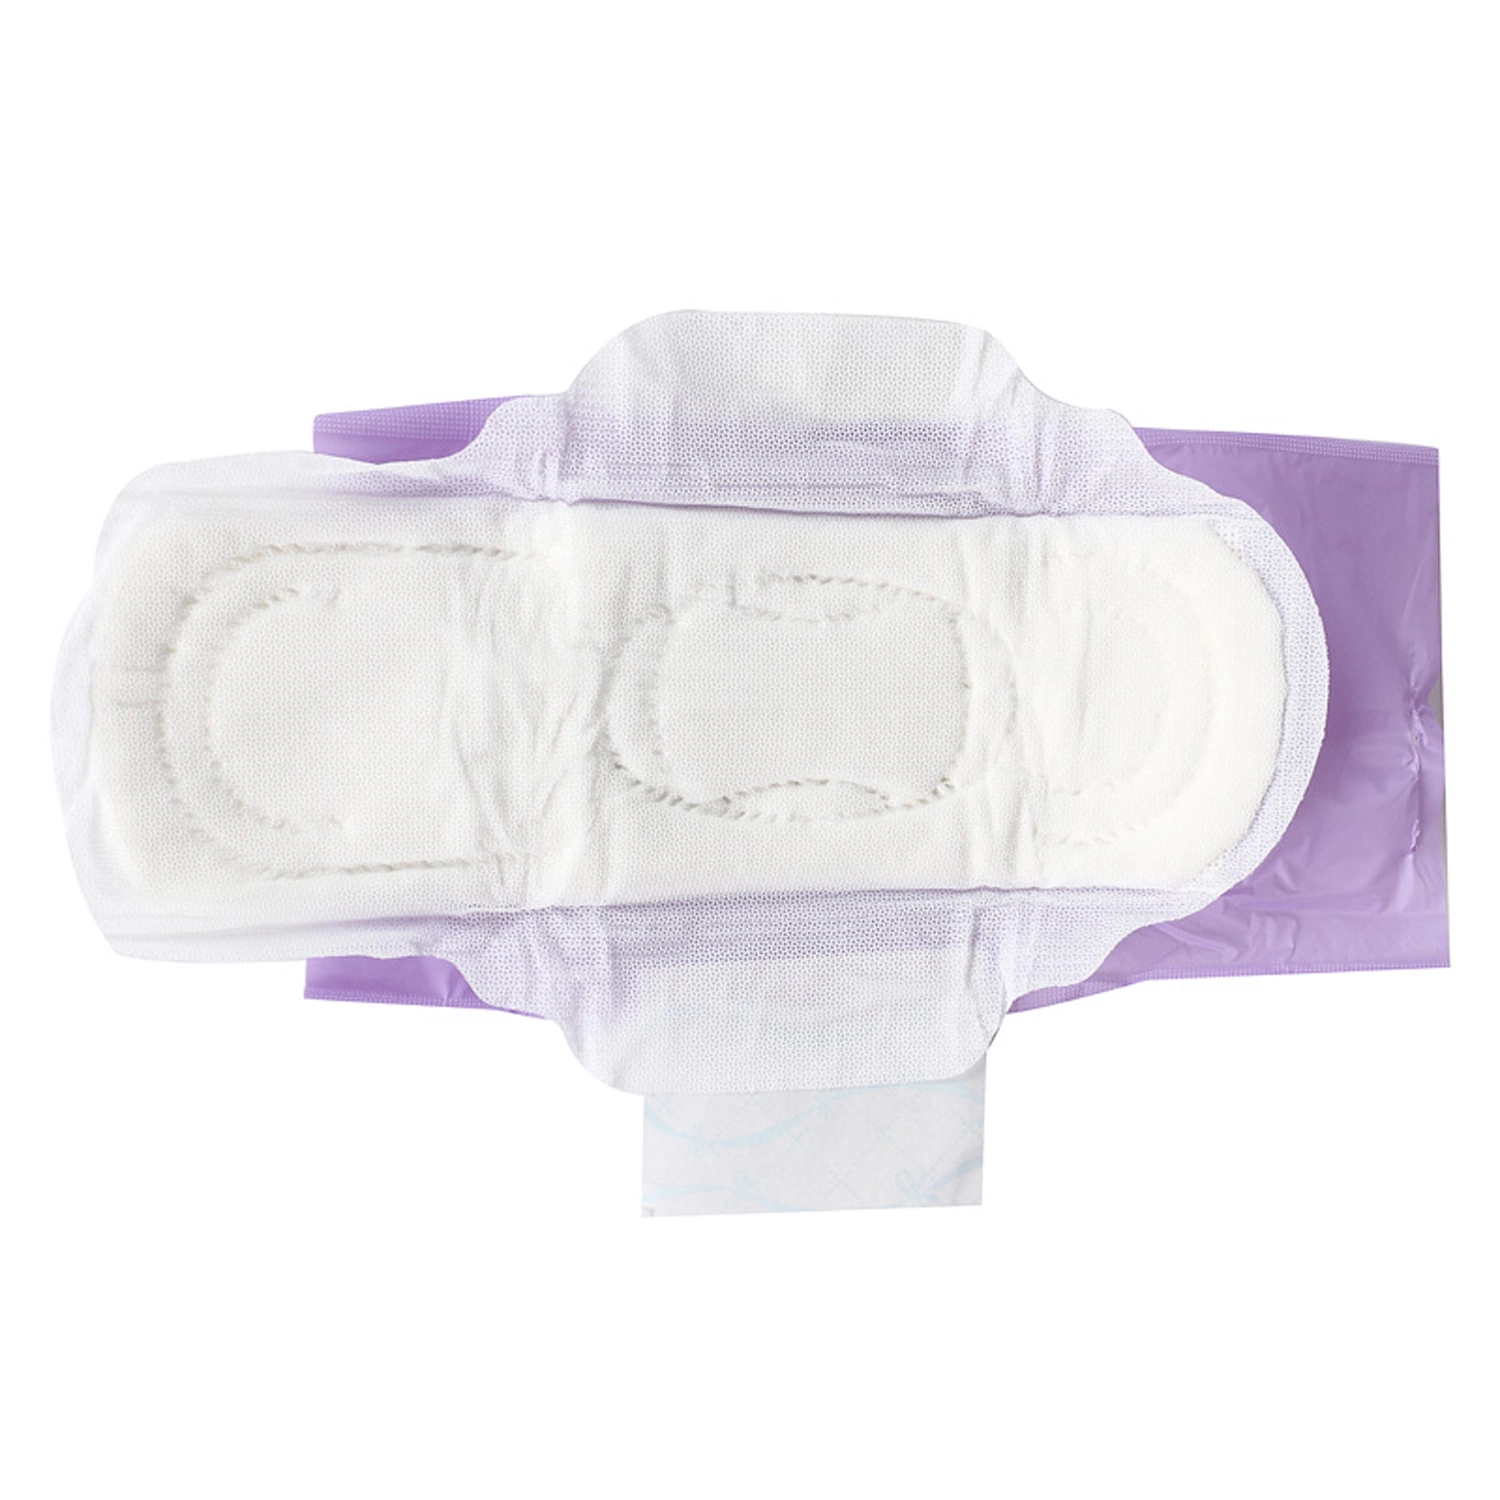 OEM Brand 280mm Lady External Use Regular Scented Sanitary Napkin with Skin Care Product